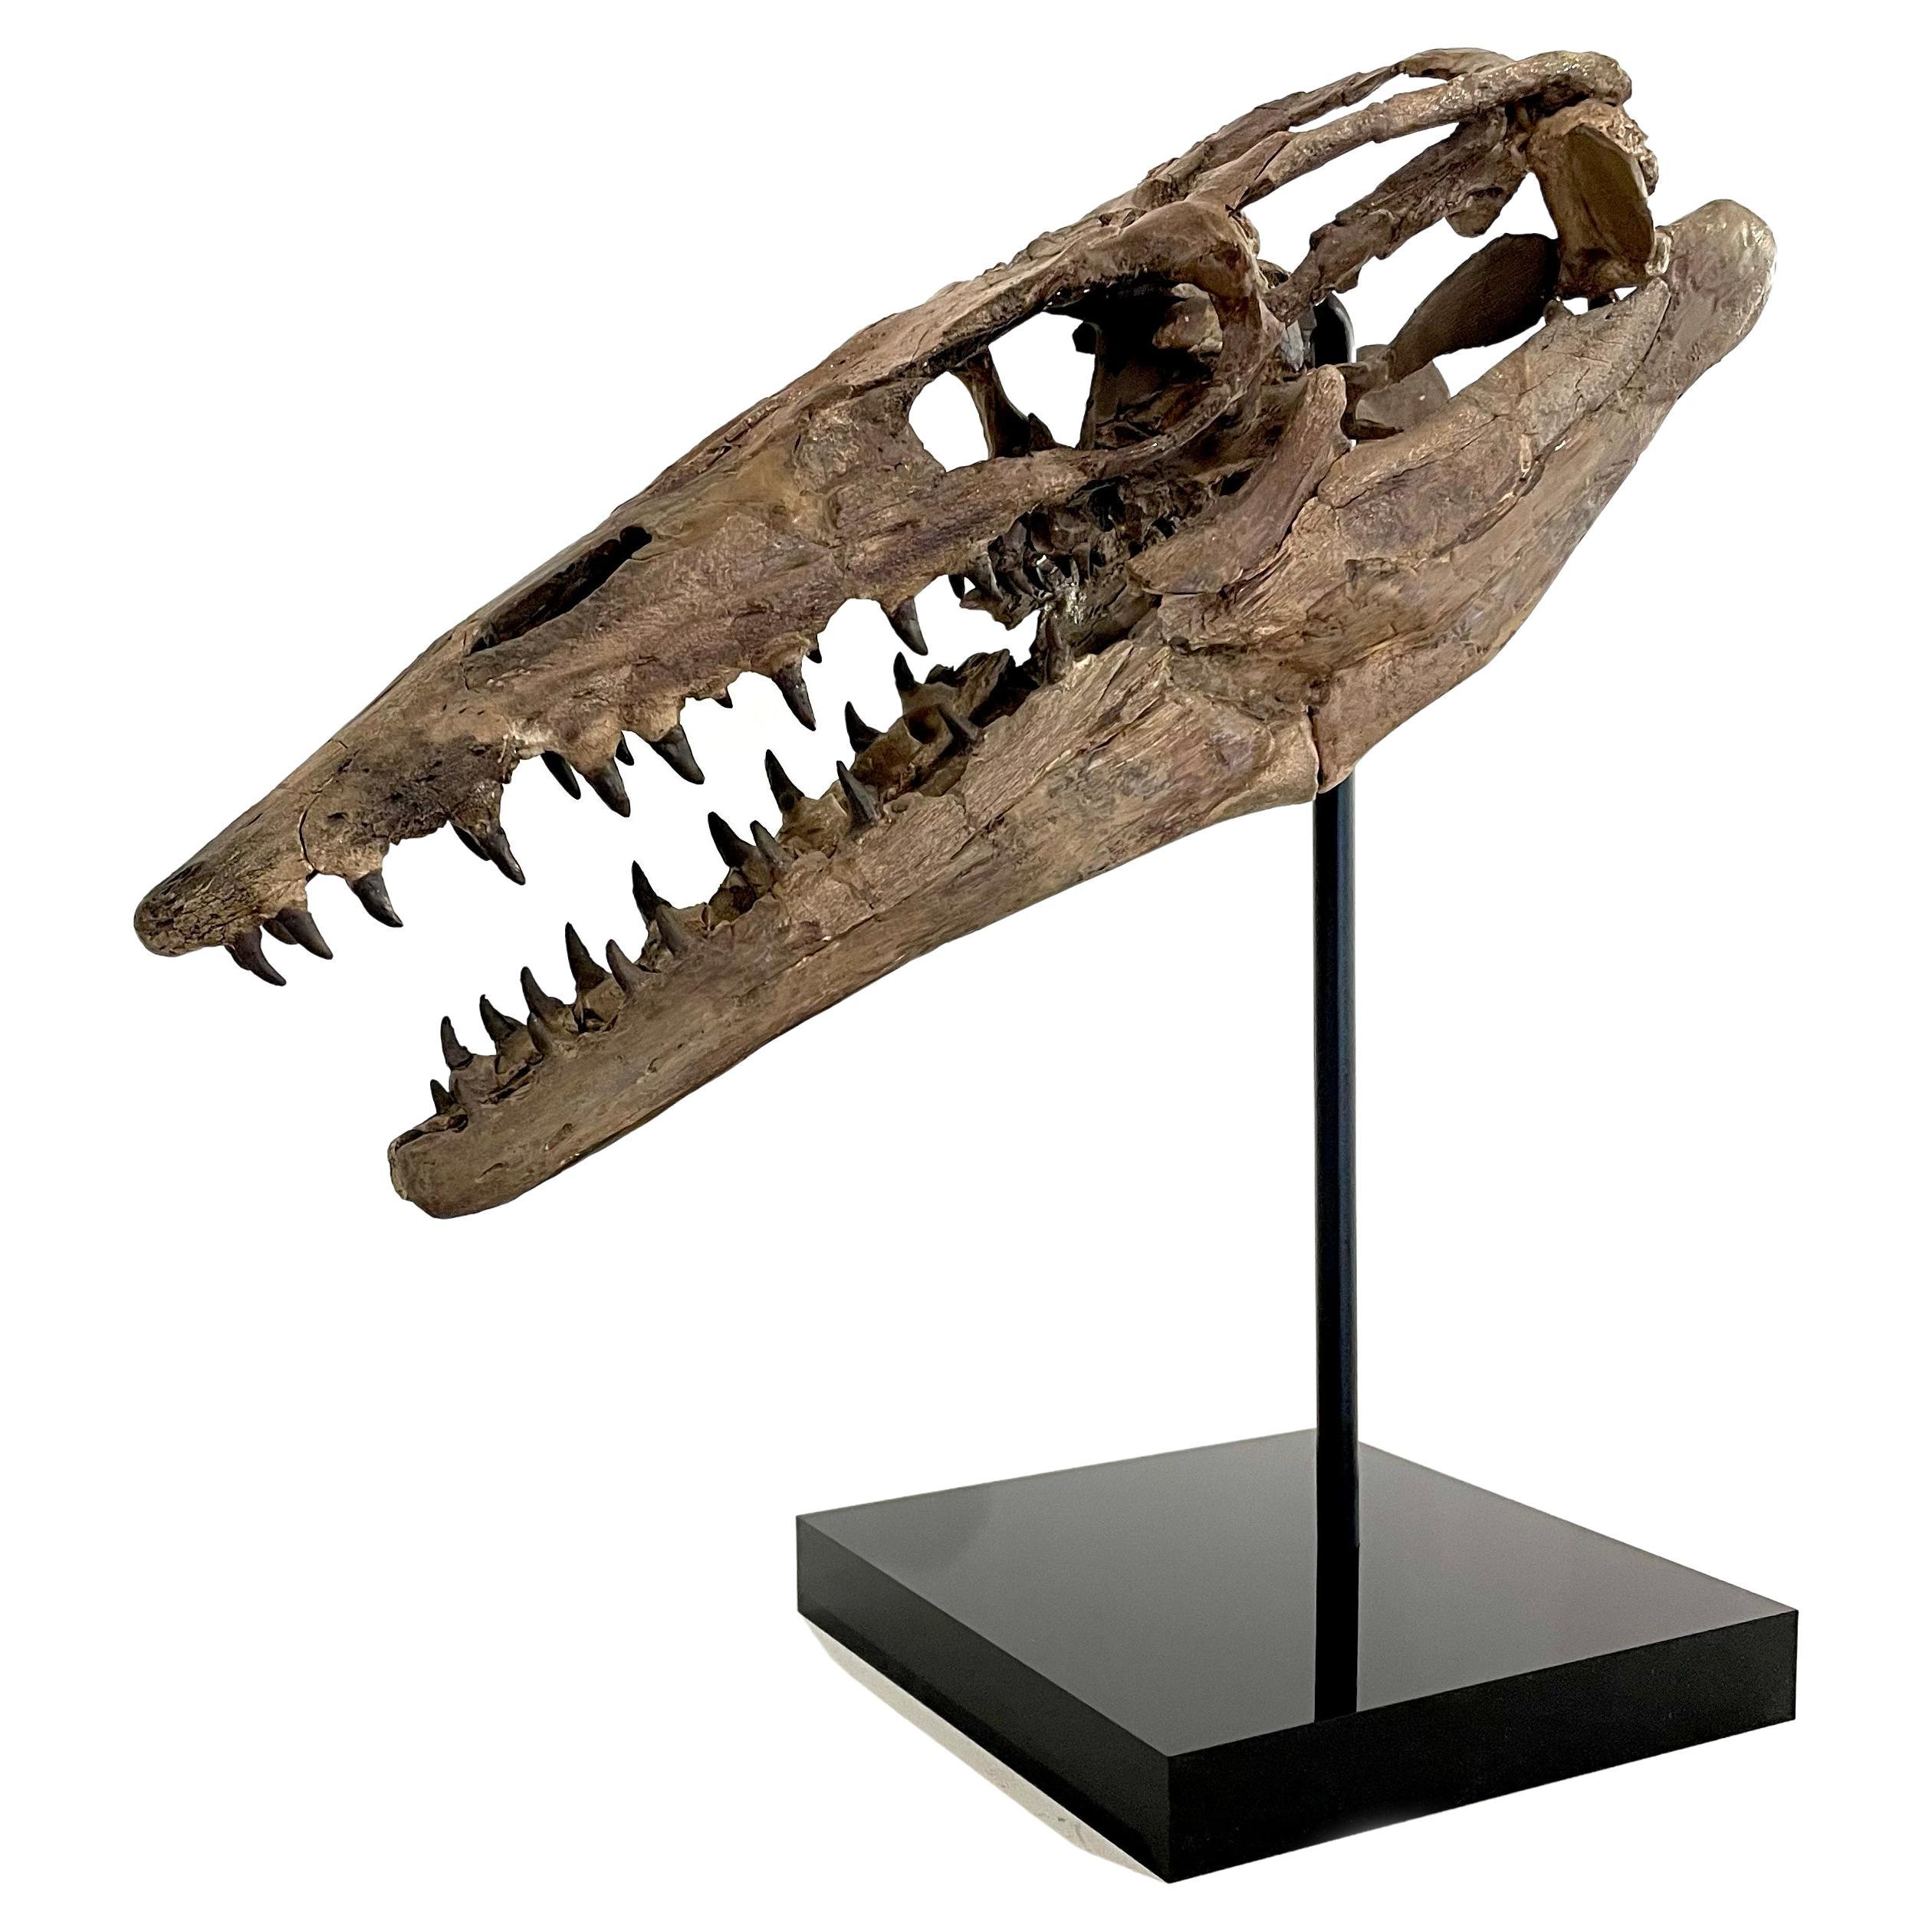 Fossilised Skull of Prehistoric Marine Reptile the Mosasaur For Sale